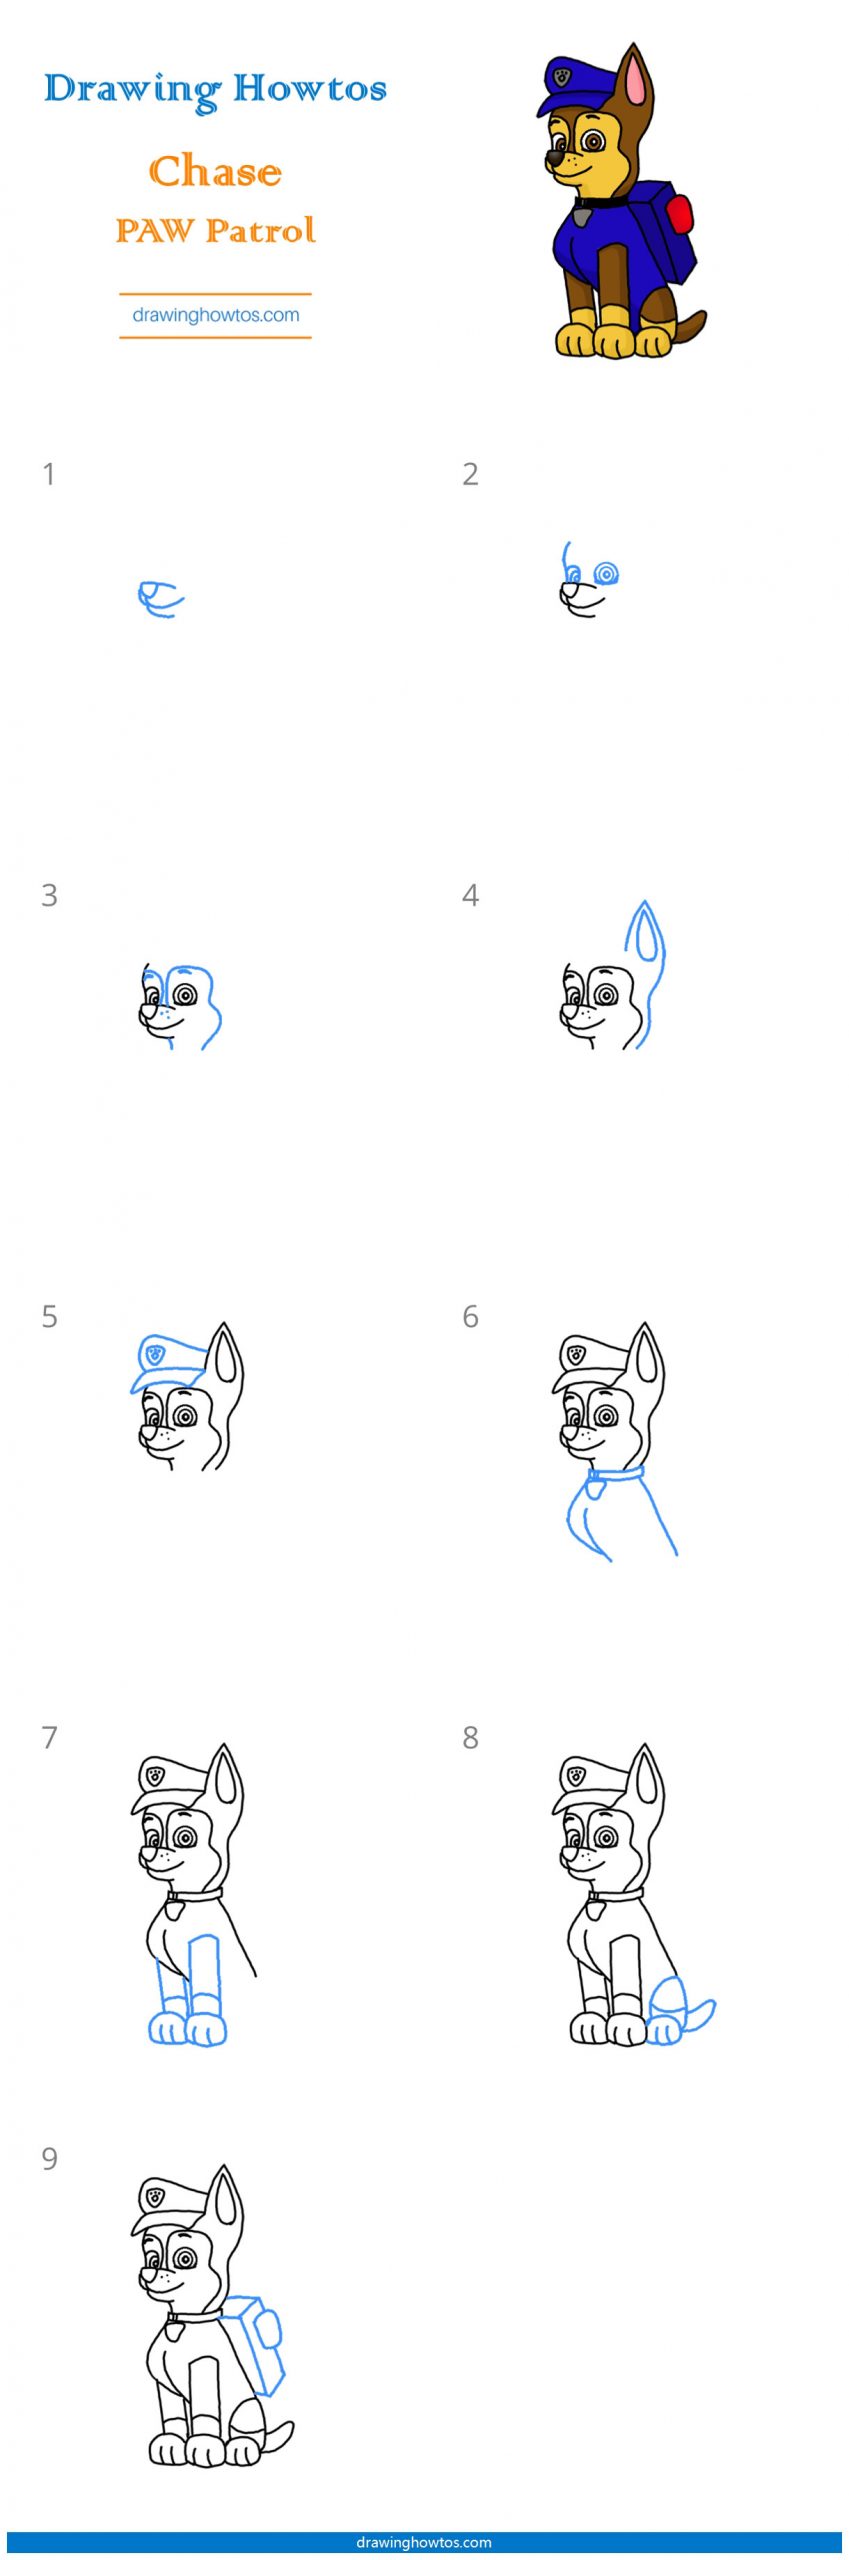 How to Draw Chase from Paw Patrol Step by Step